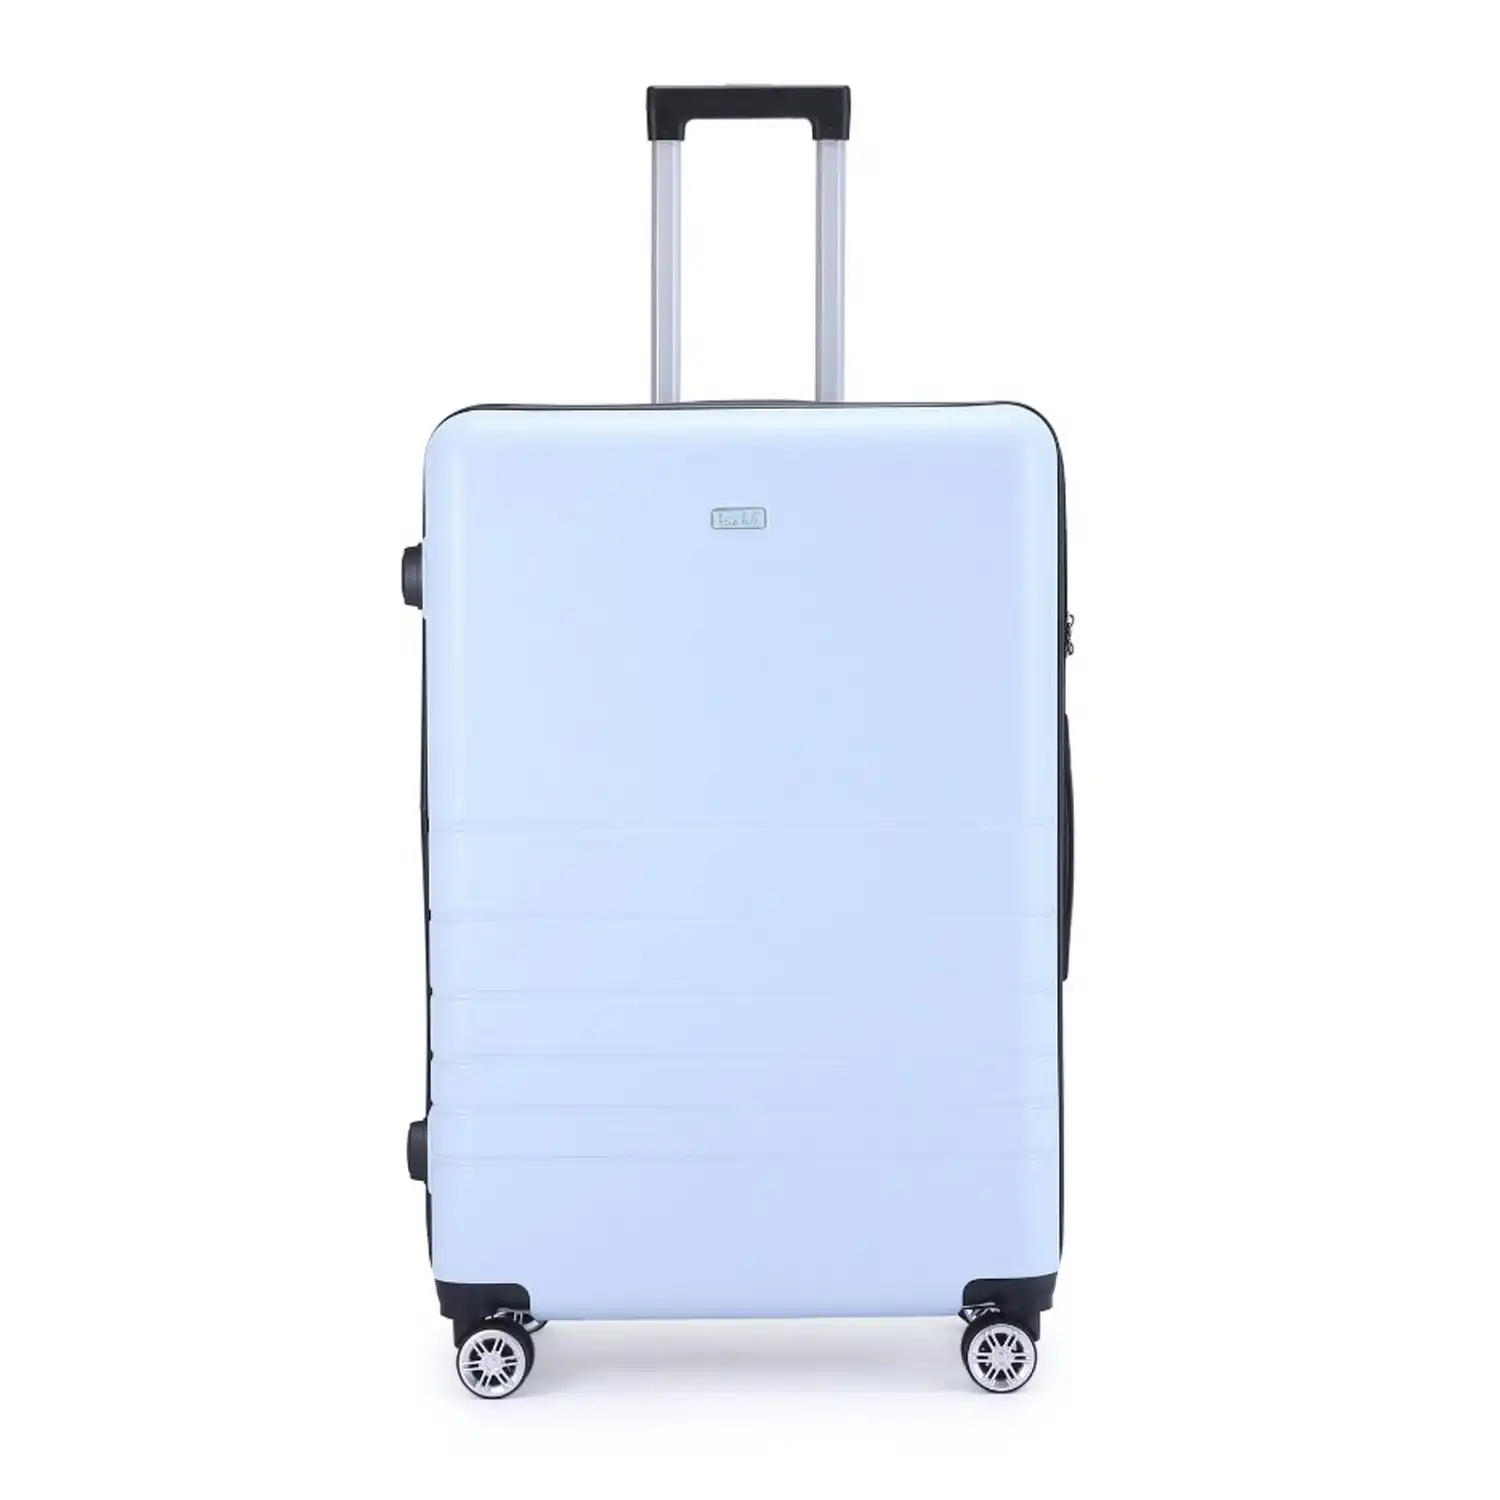 Kate Hill Bloom Luggage Large Wheeled Trolley Hard Suitcase Blue 120-139L